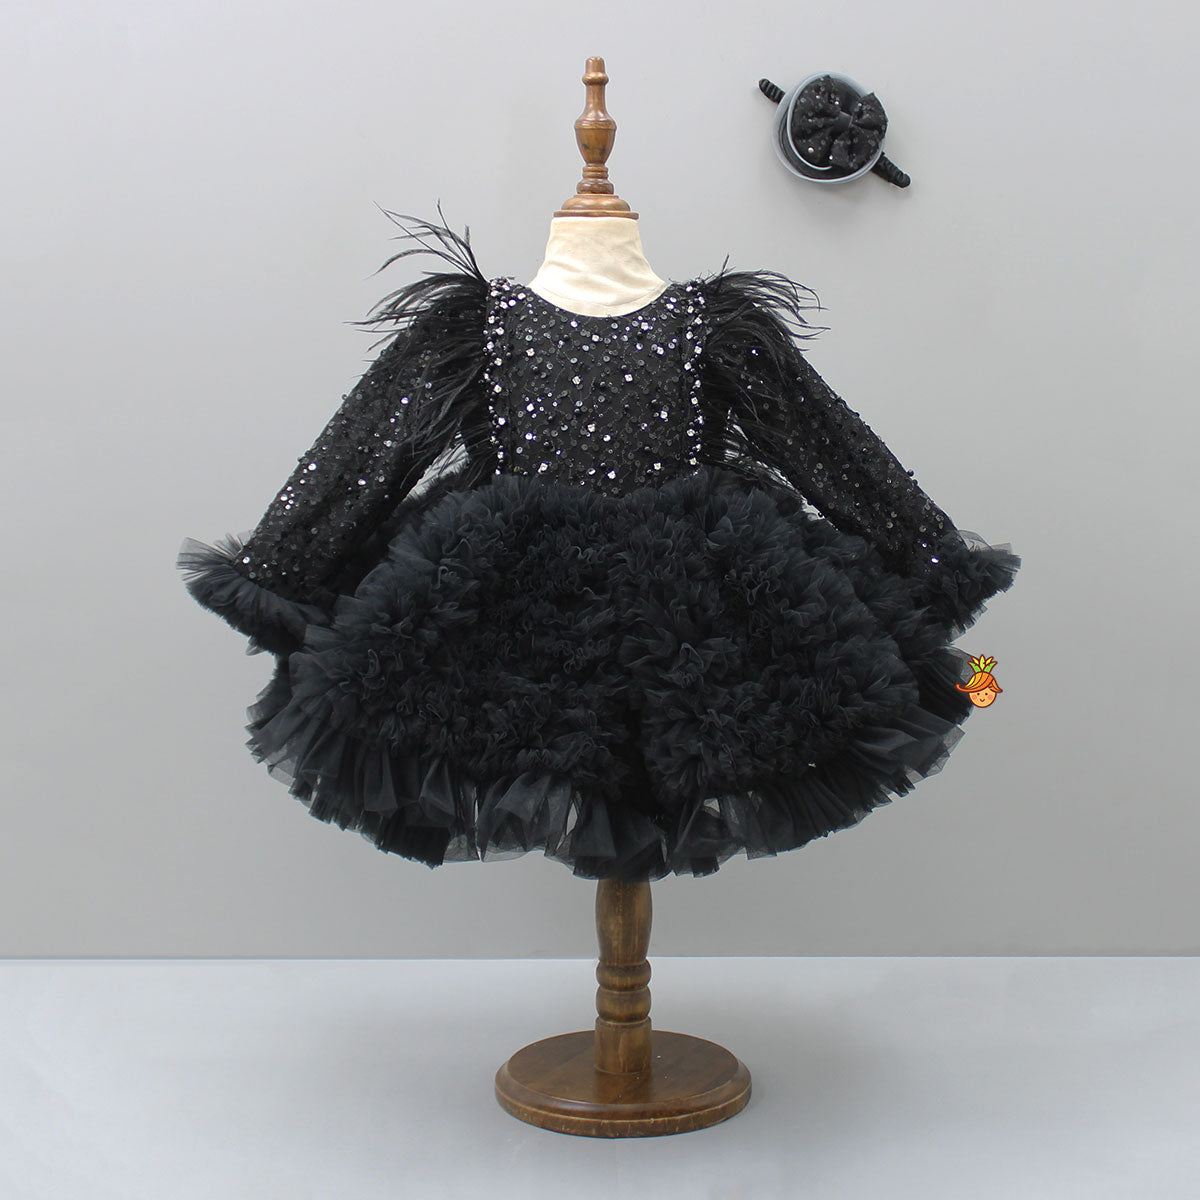 Sequins Embellished Ruffled Black Dress With Matching Swirled Bowie Headband